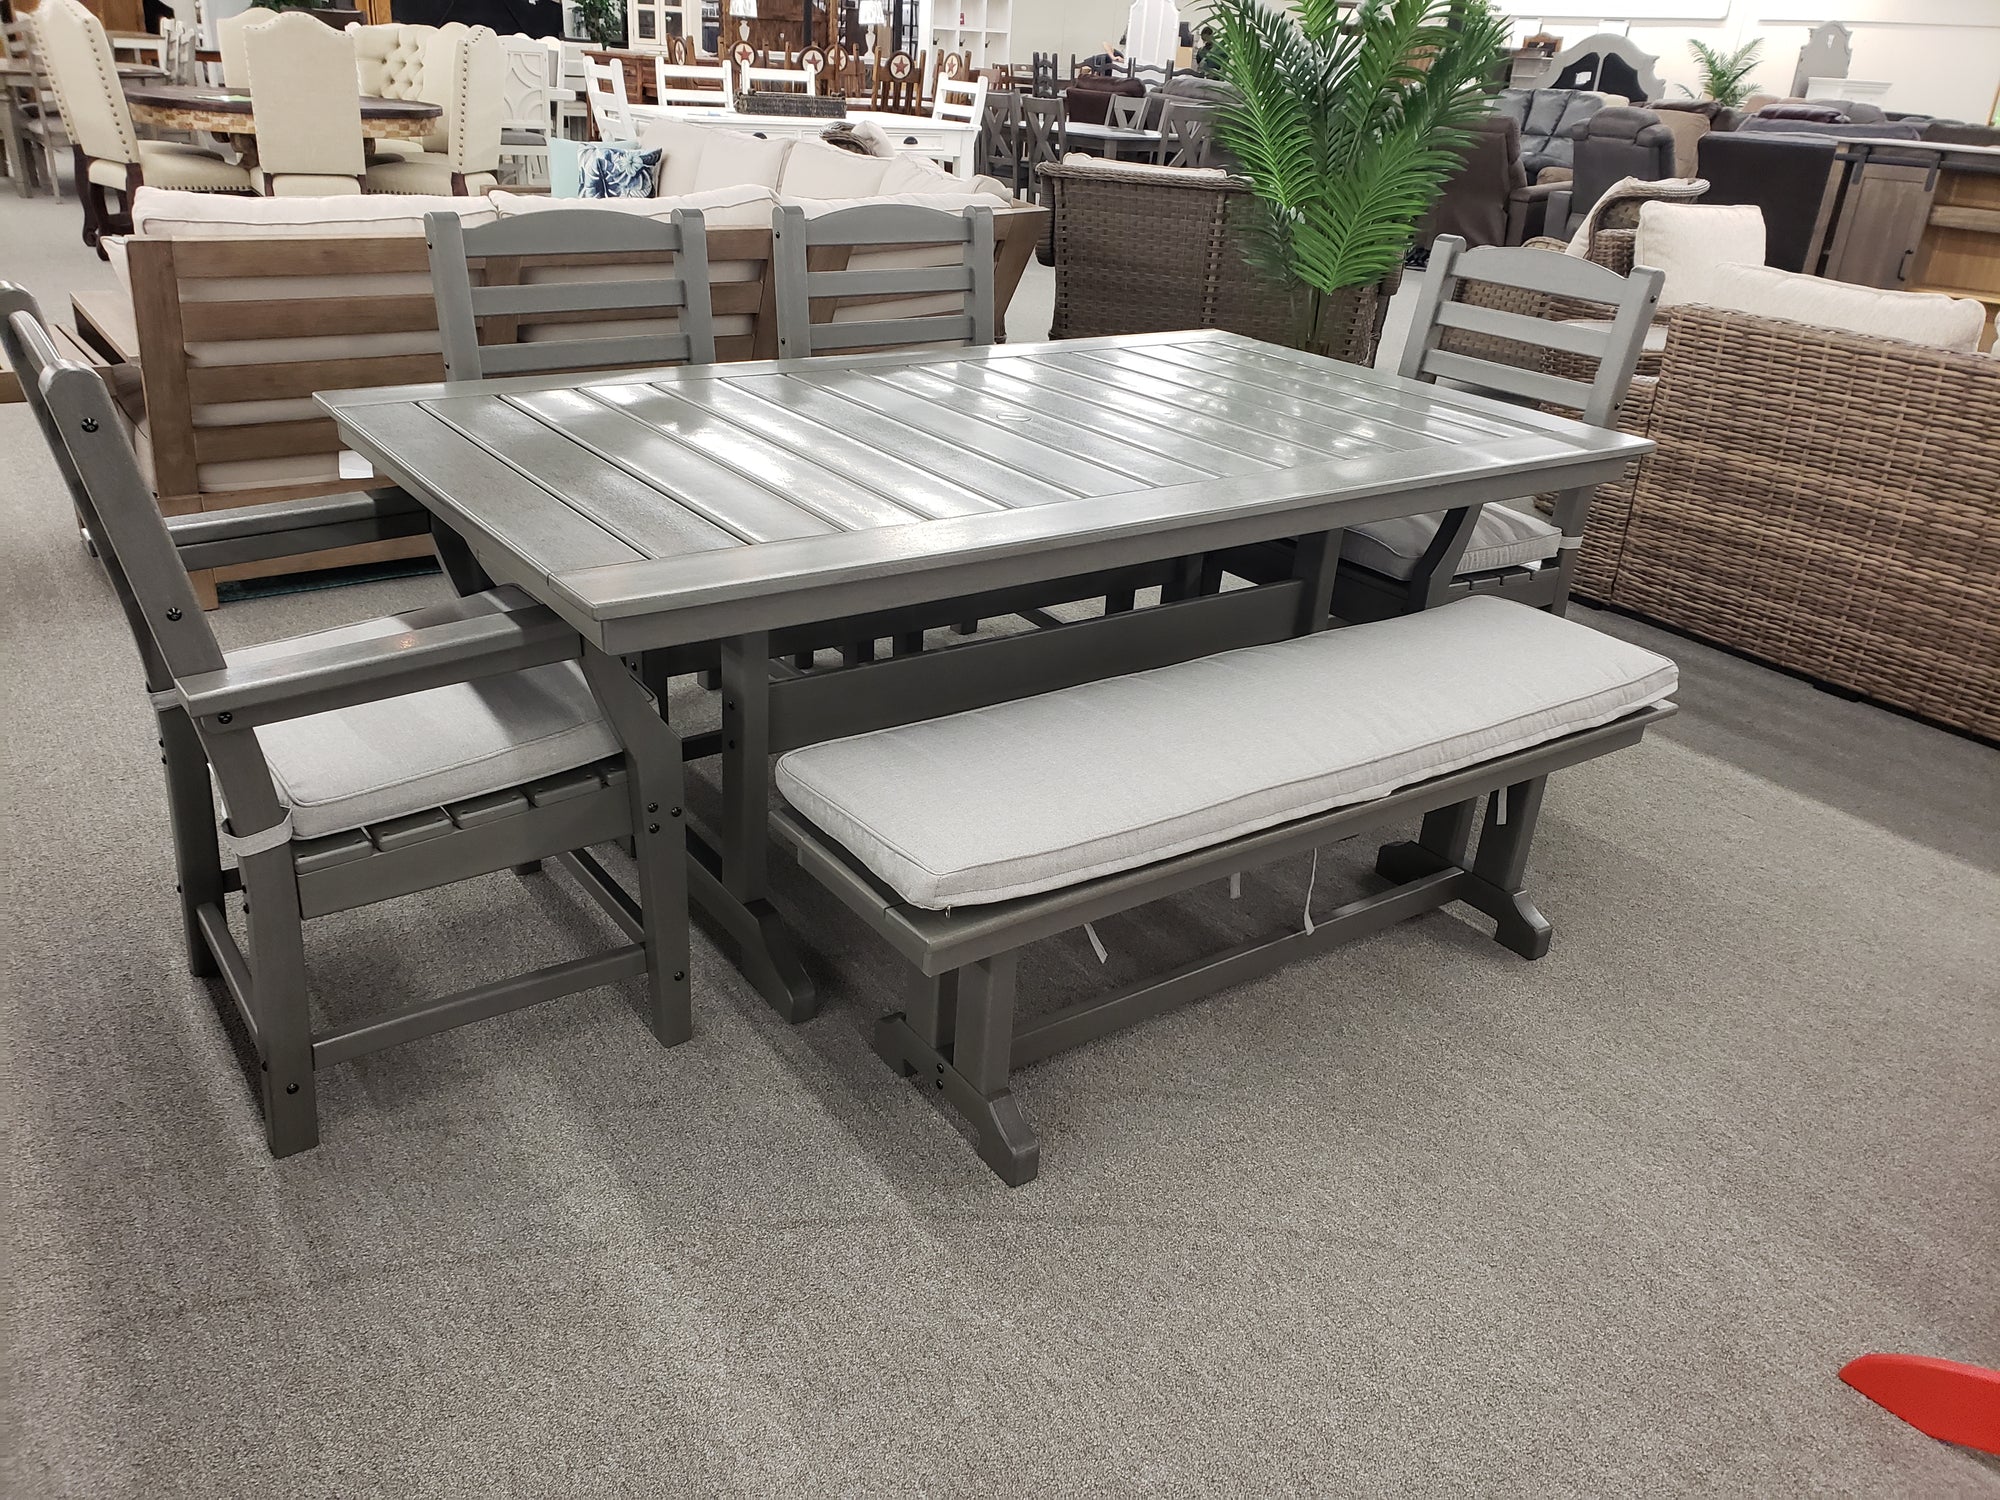 P913 FI-A Outdoor Dining Table W/4 Chairs And Bench